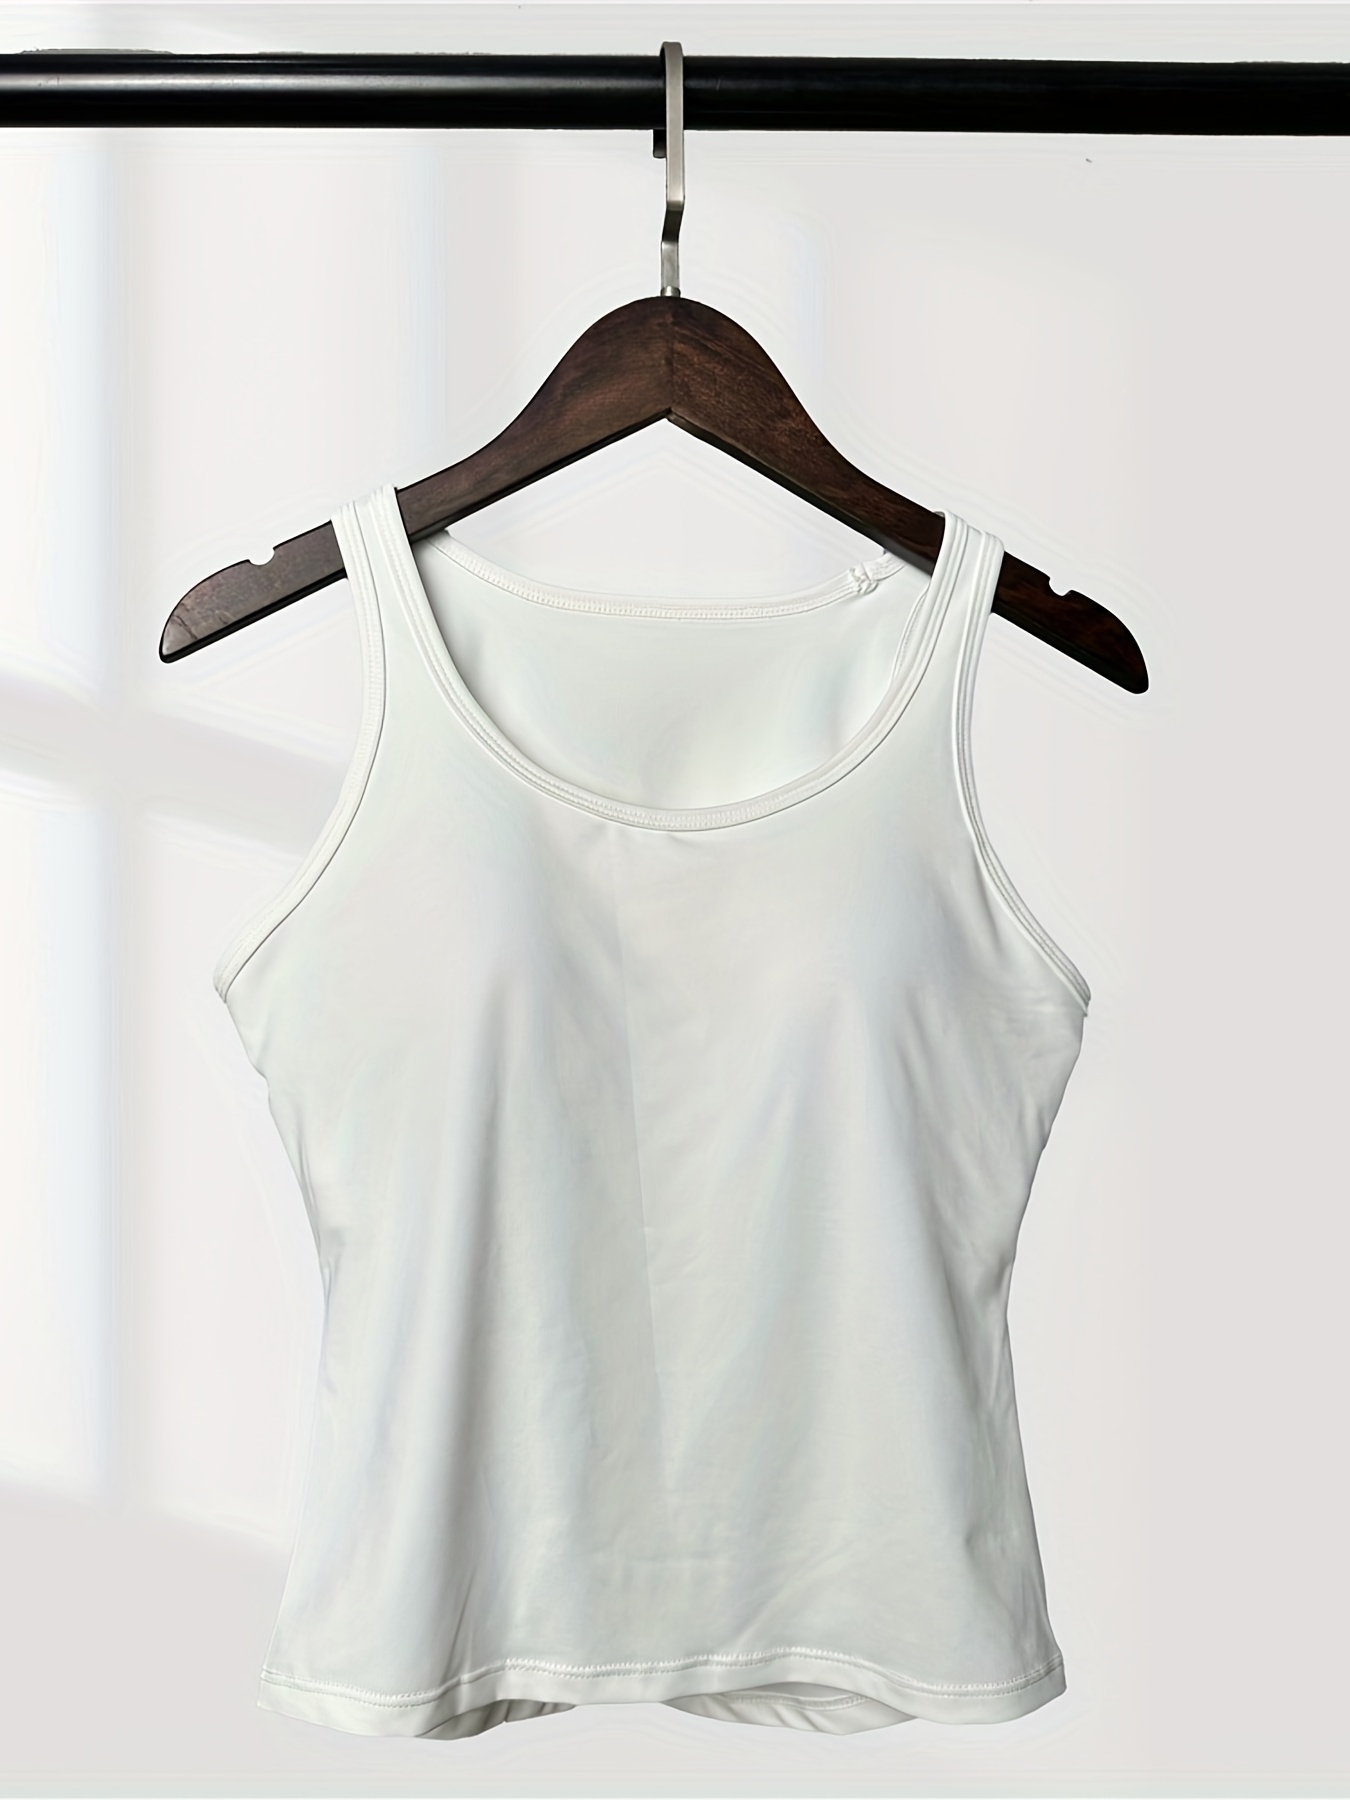 Solid Tank Tops For Girl's And Women's Yoga Wear